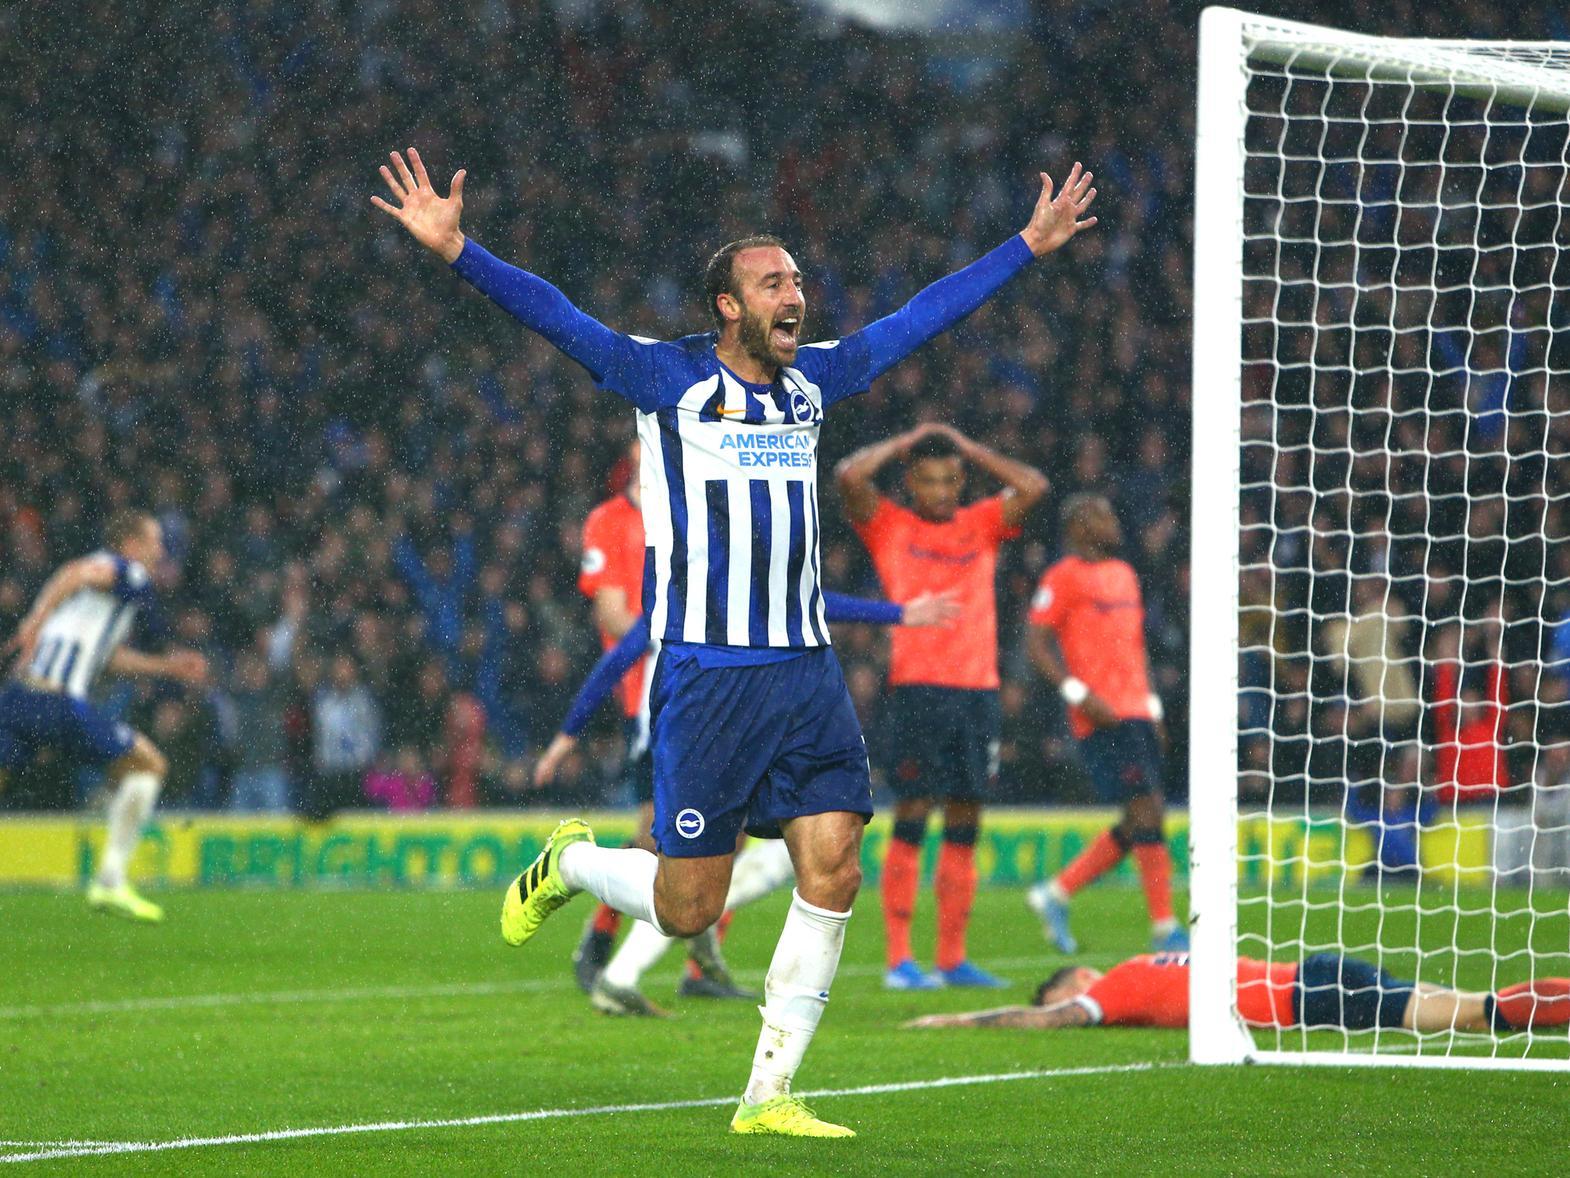 Ever wondered how much Glenn Murray's car cost? We've got you covered.